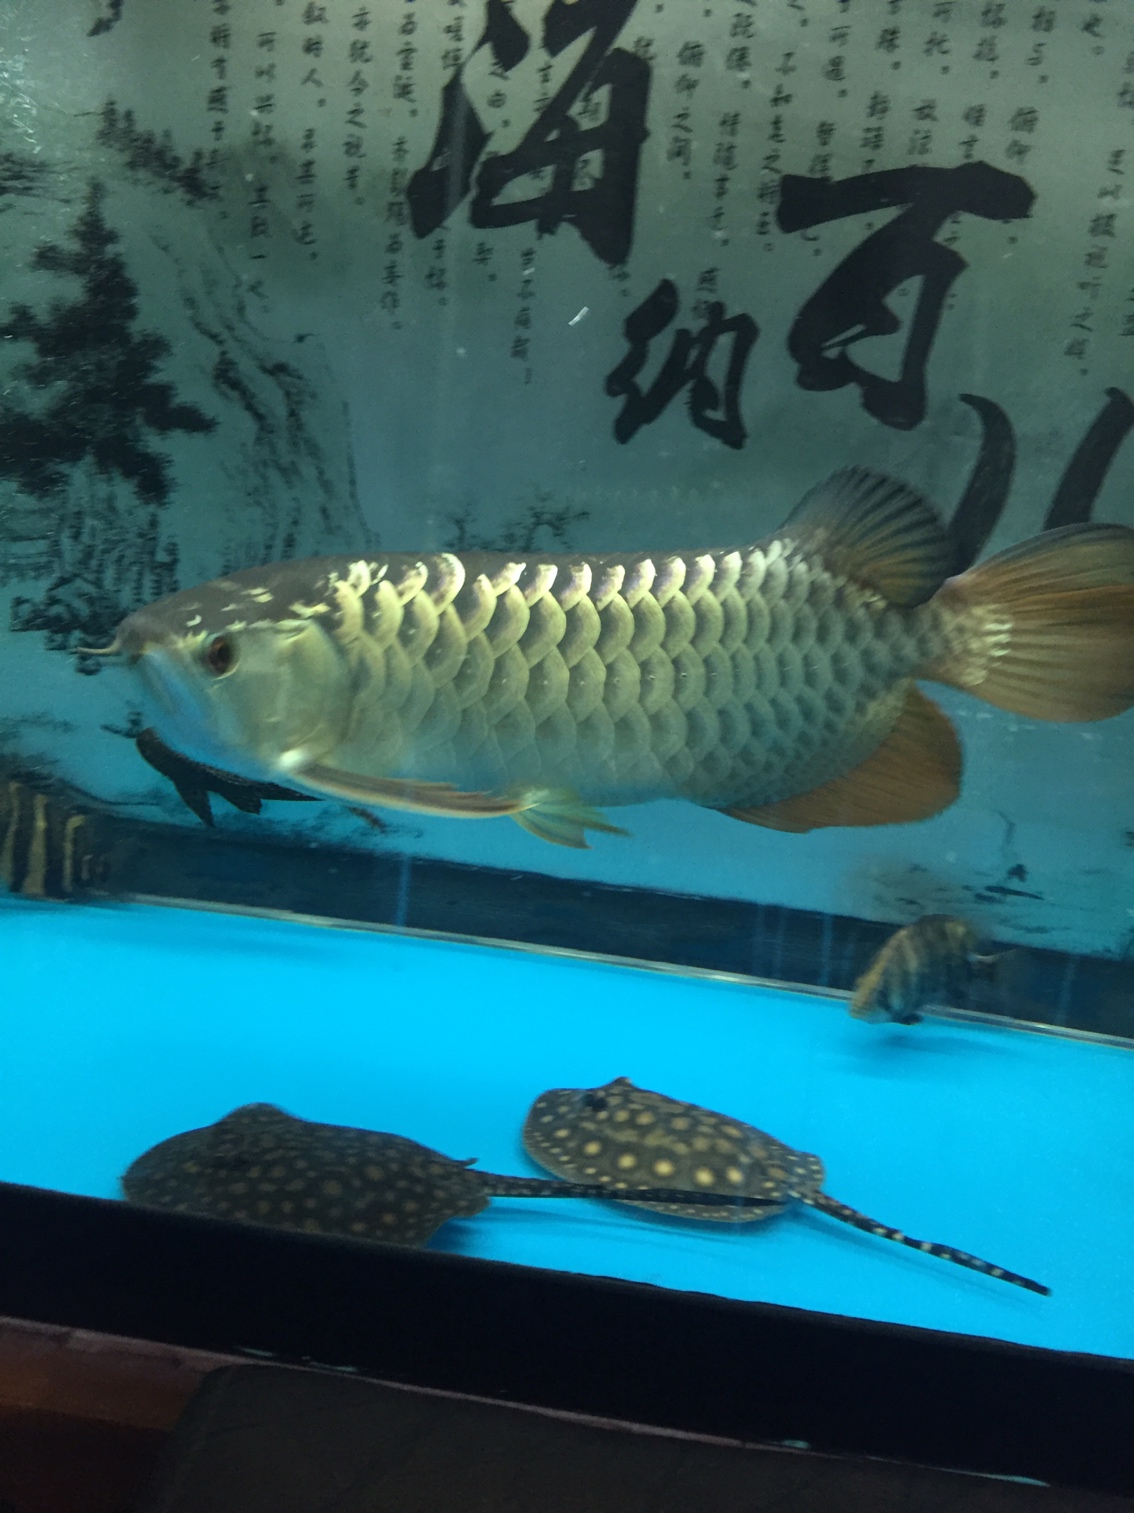 Sunbathing fish by the way help me see what stingray Stingray ASIAN AROWANA,AROWANA,STINGRAY The7sheet